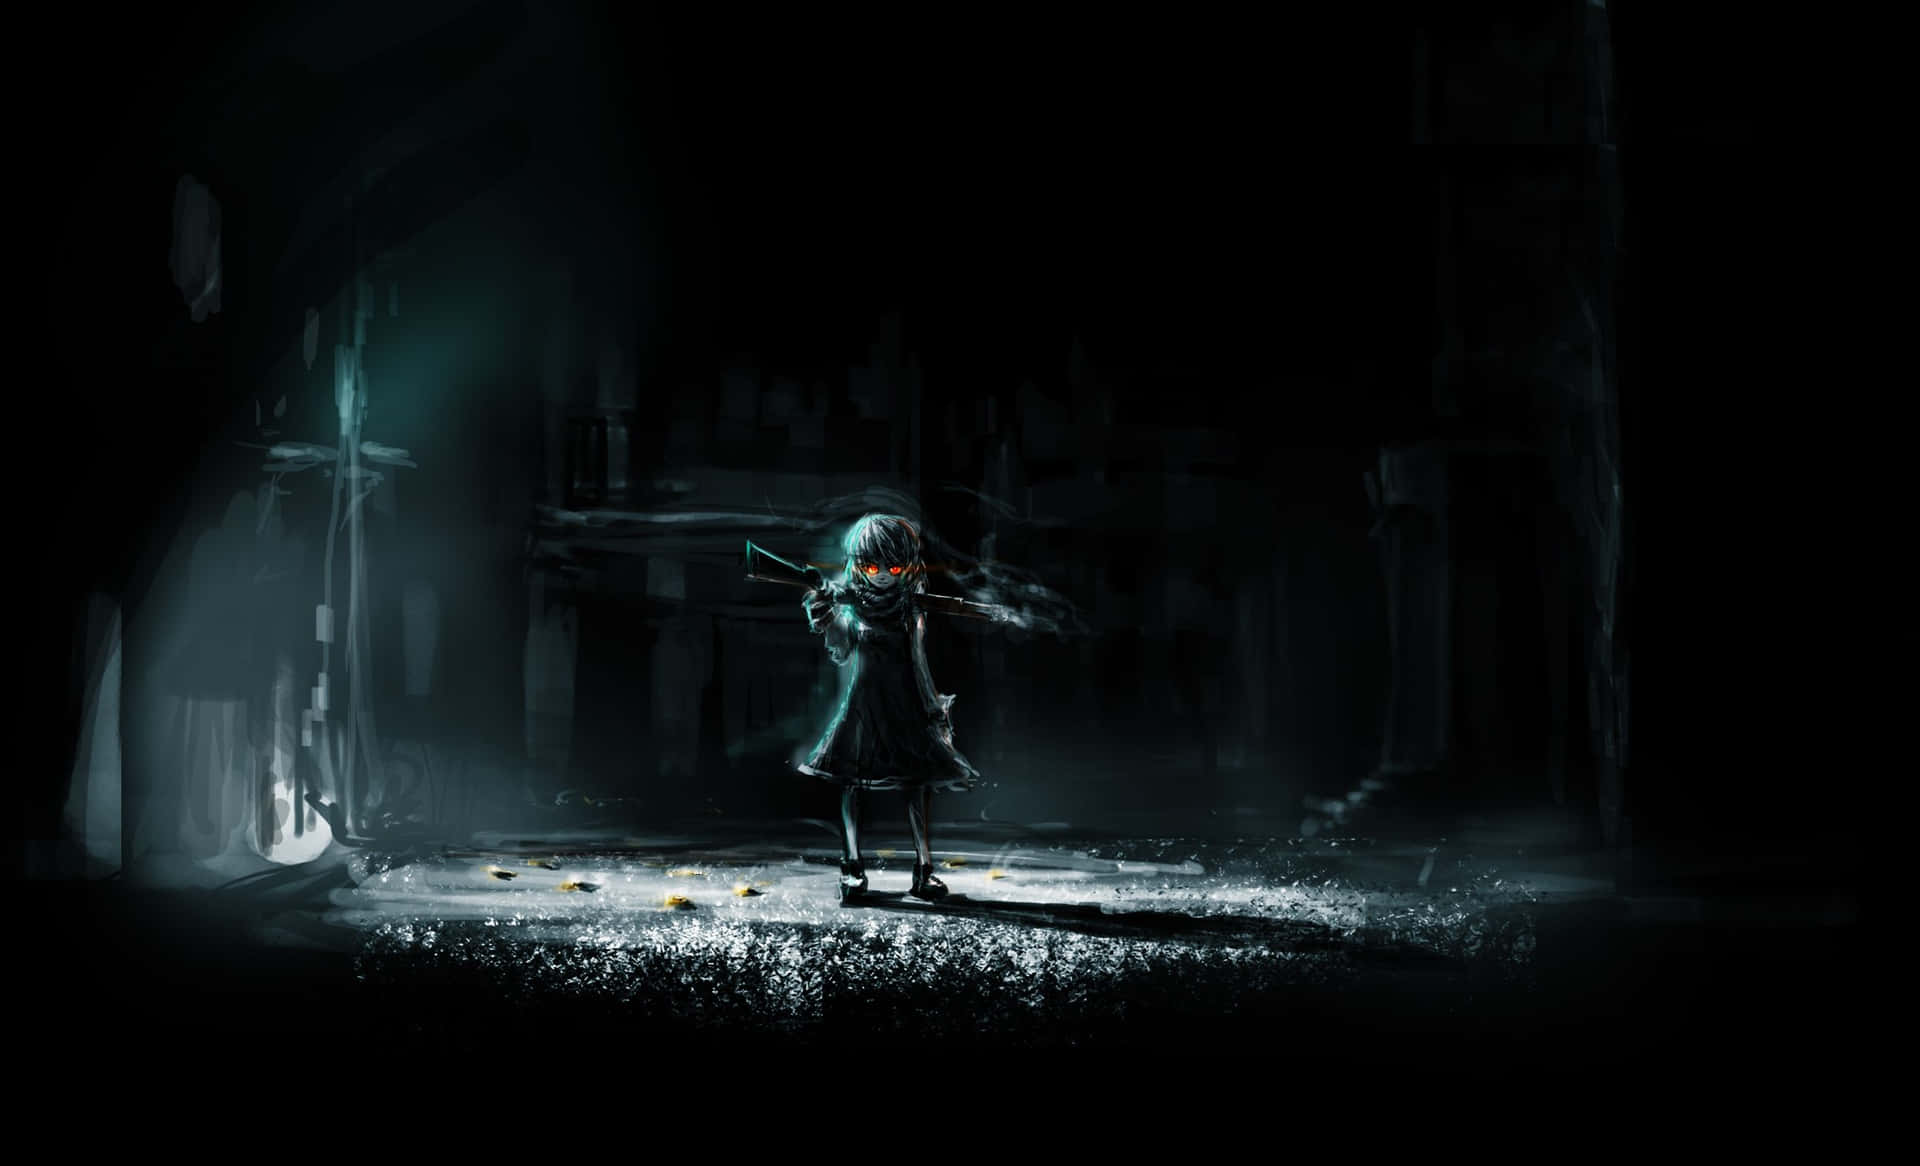 An eerie yet breathtakingly beautiful depiction of an anime character Wallpaper